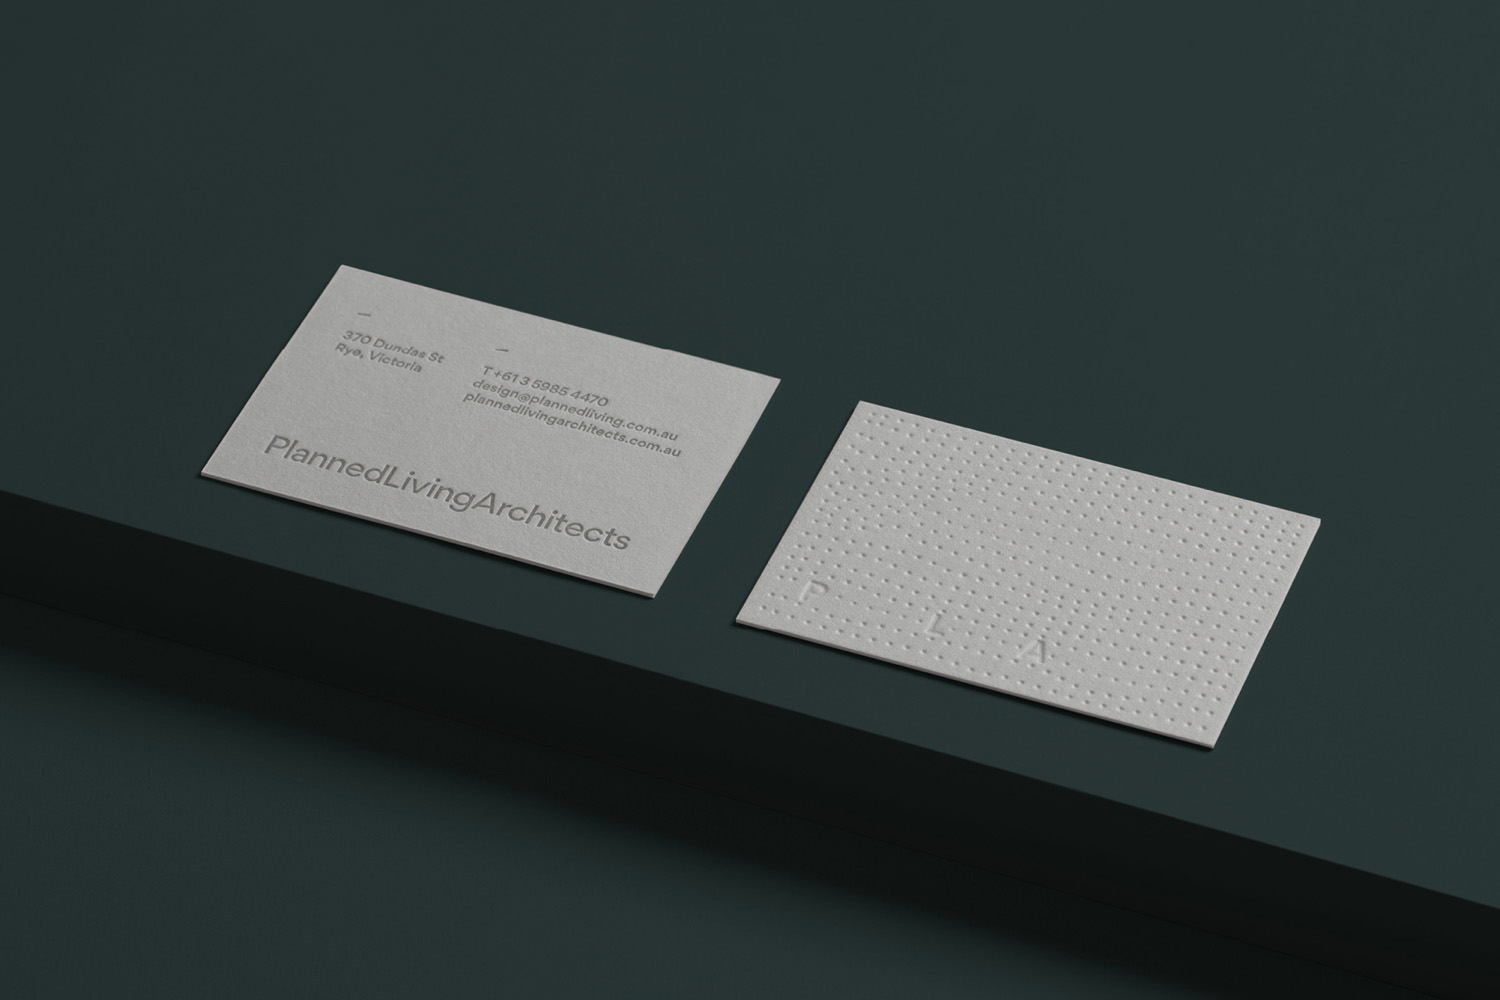 Architect Business Cards – Planned Living Architects by A Friend Of Mine